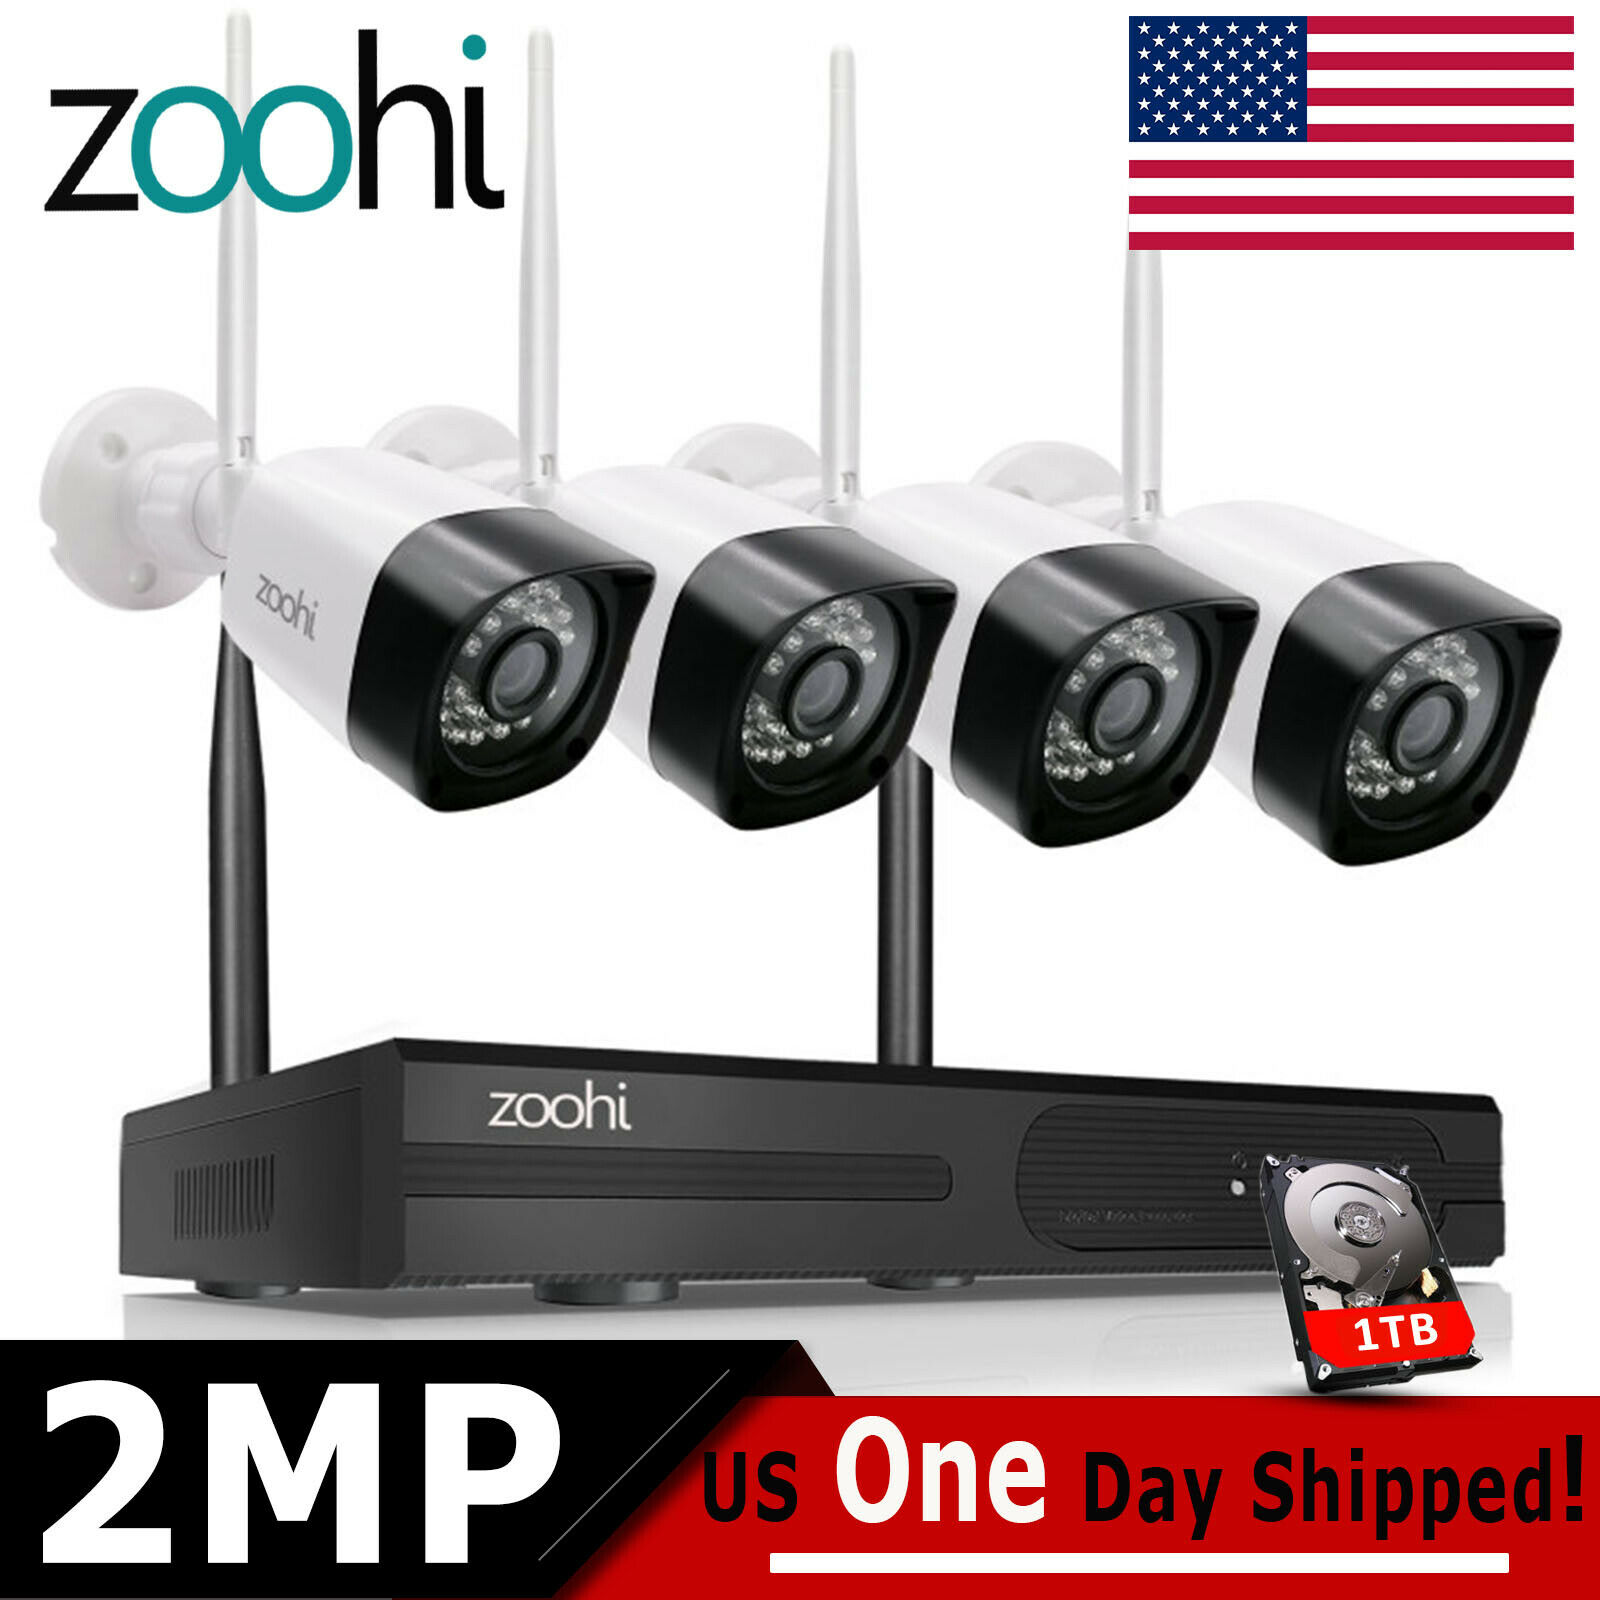 Zoohi 1080p Home Security Camera System Wireless Outdoor Cctv 4ch Hdmi Nvr 1tb